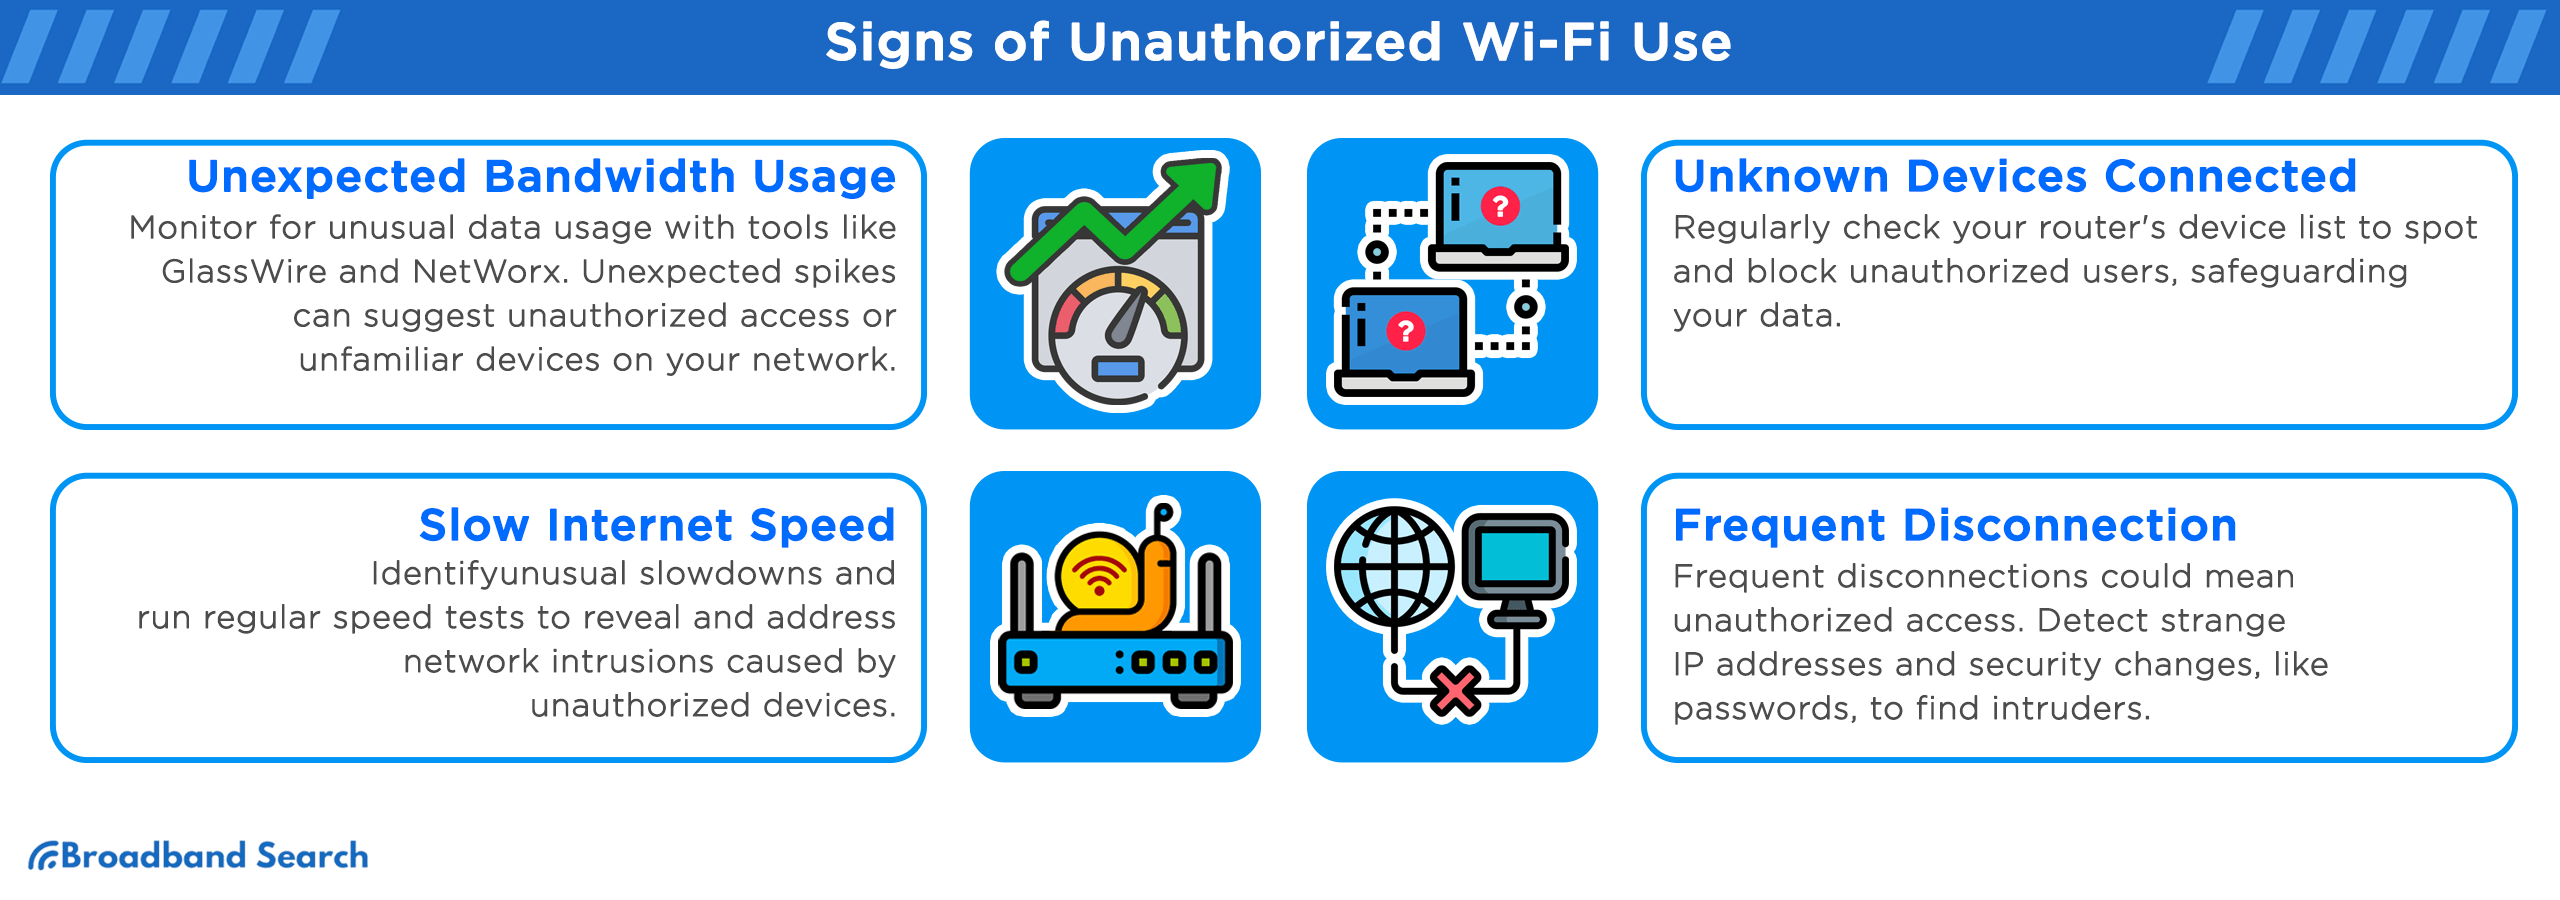 signs of unauthorized wi-fi use